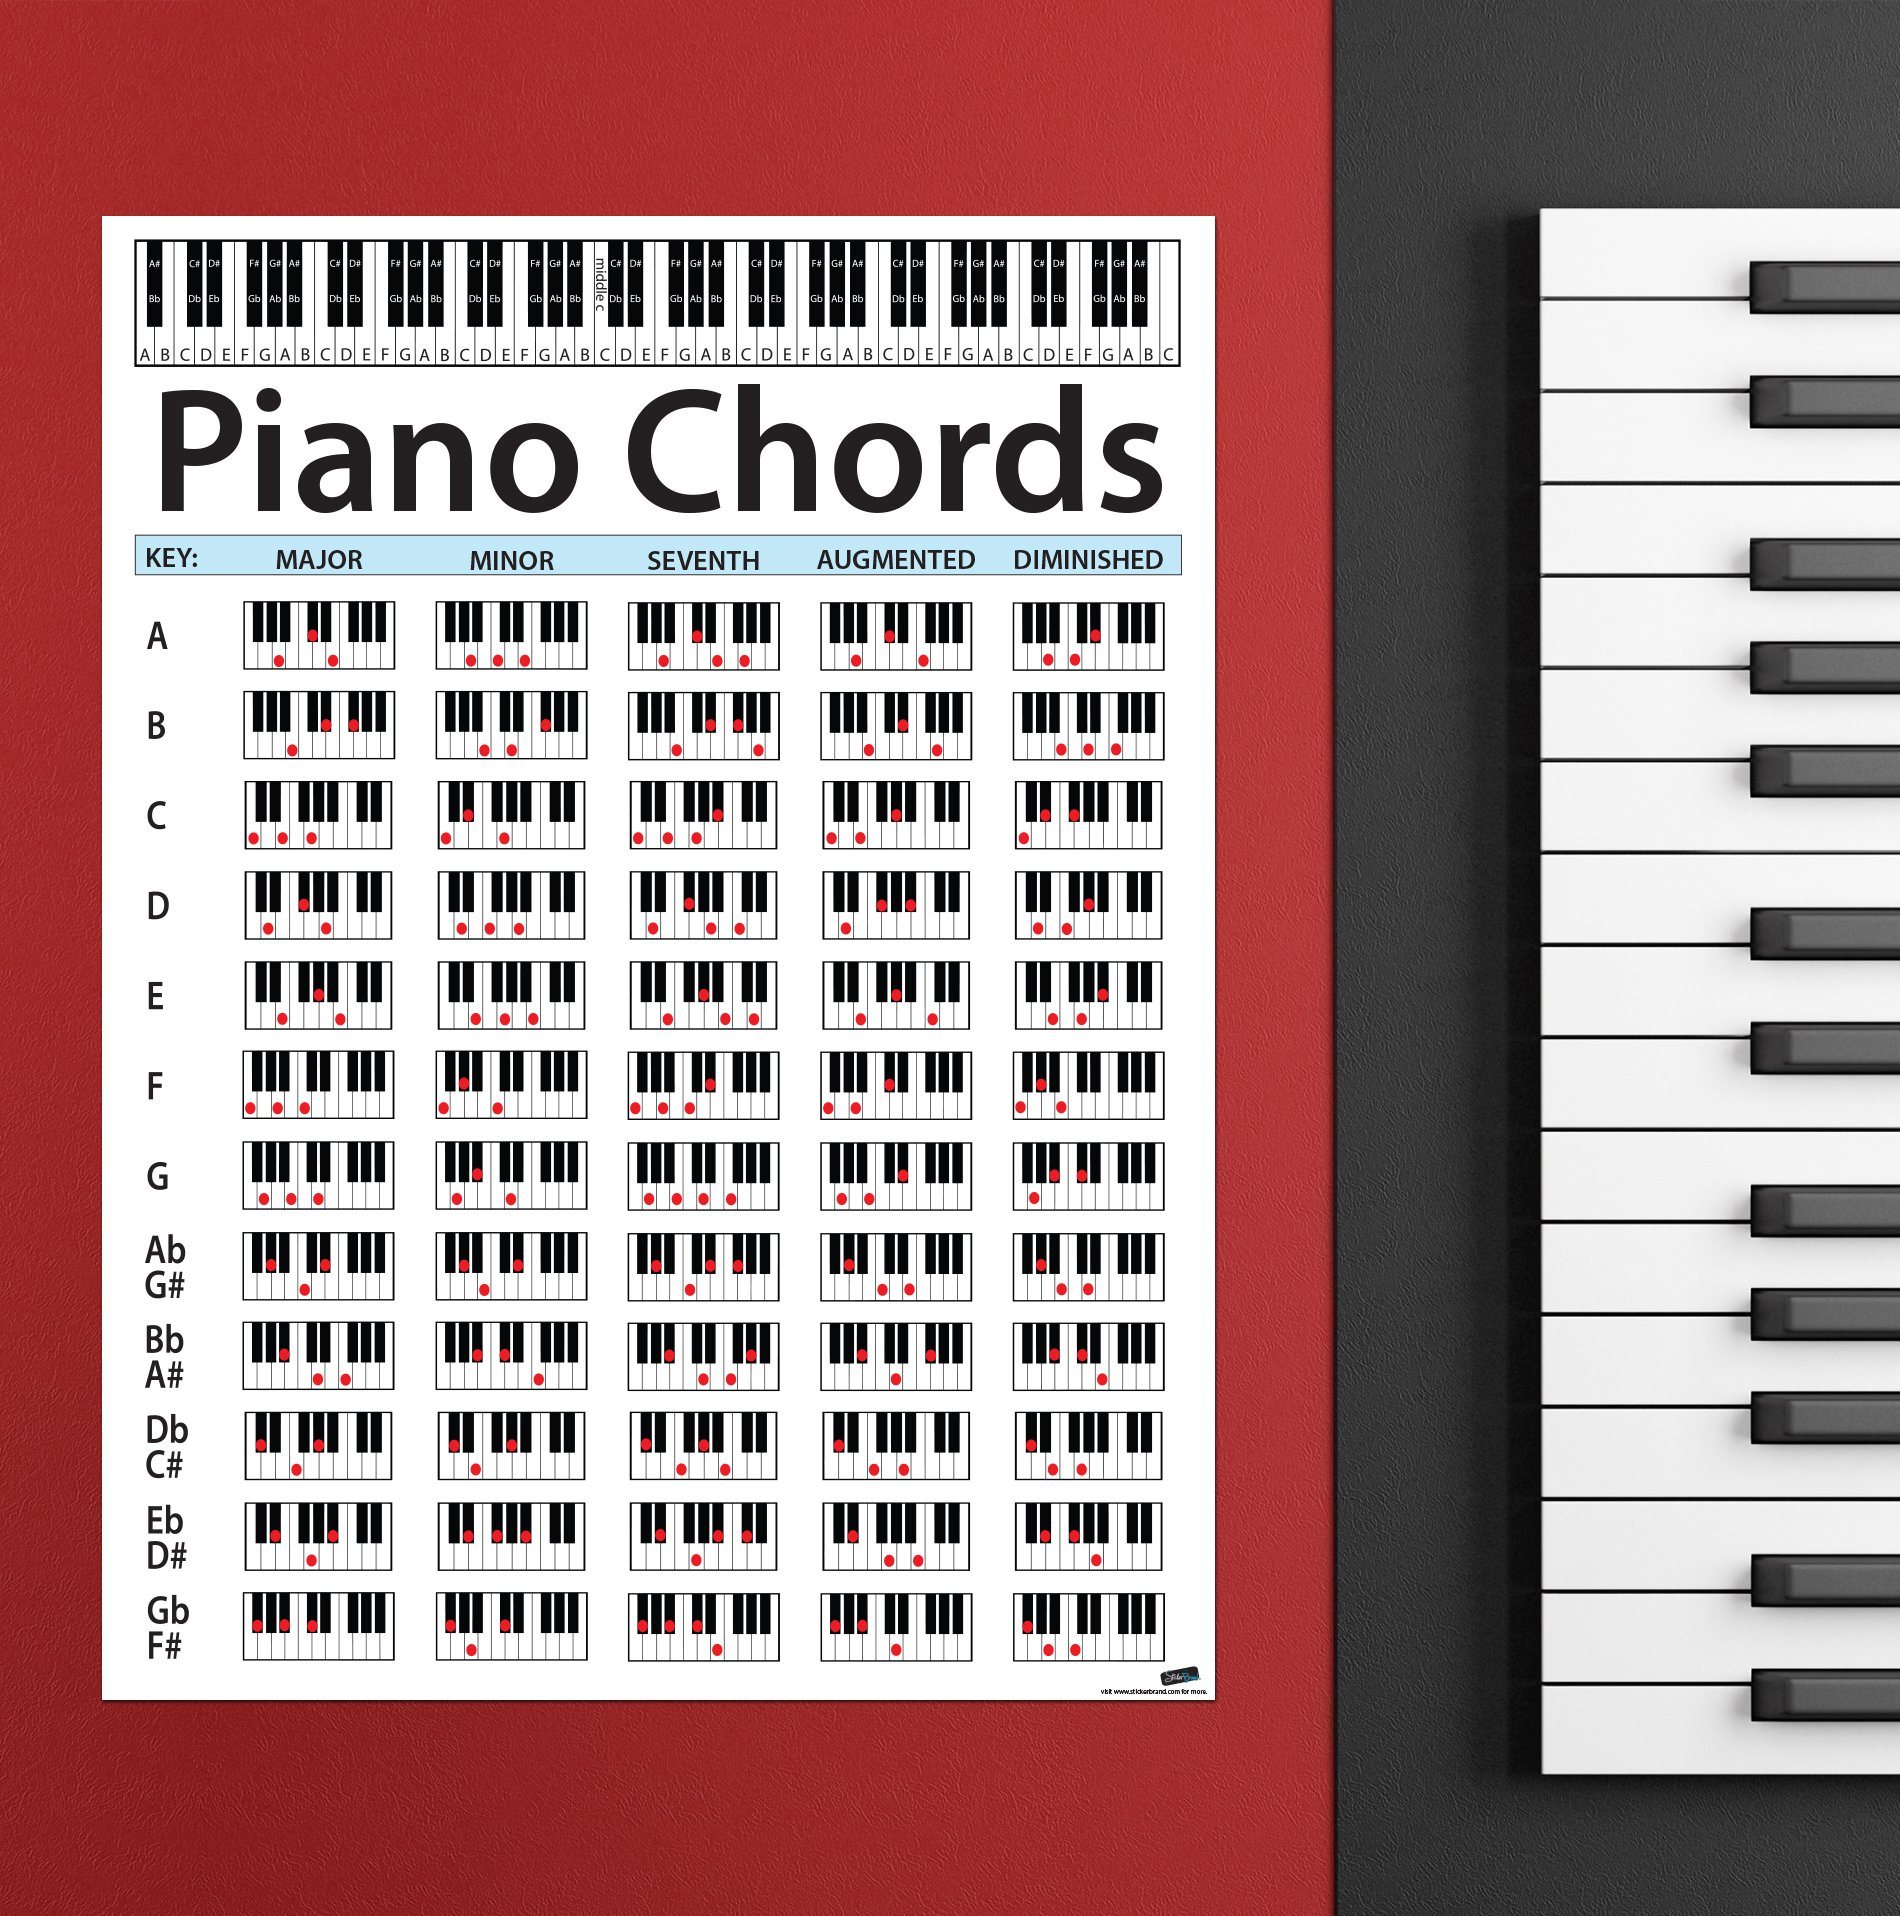 Piano Chord Chart Popular Piano Chord Progressions Prototypical Piano Chord Chart With